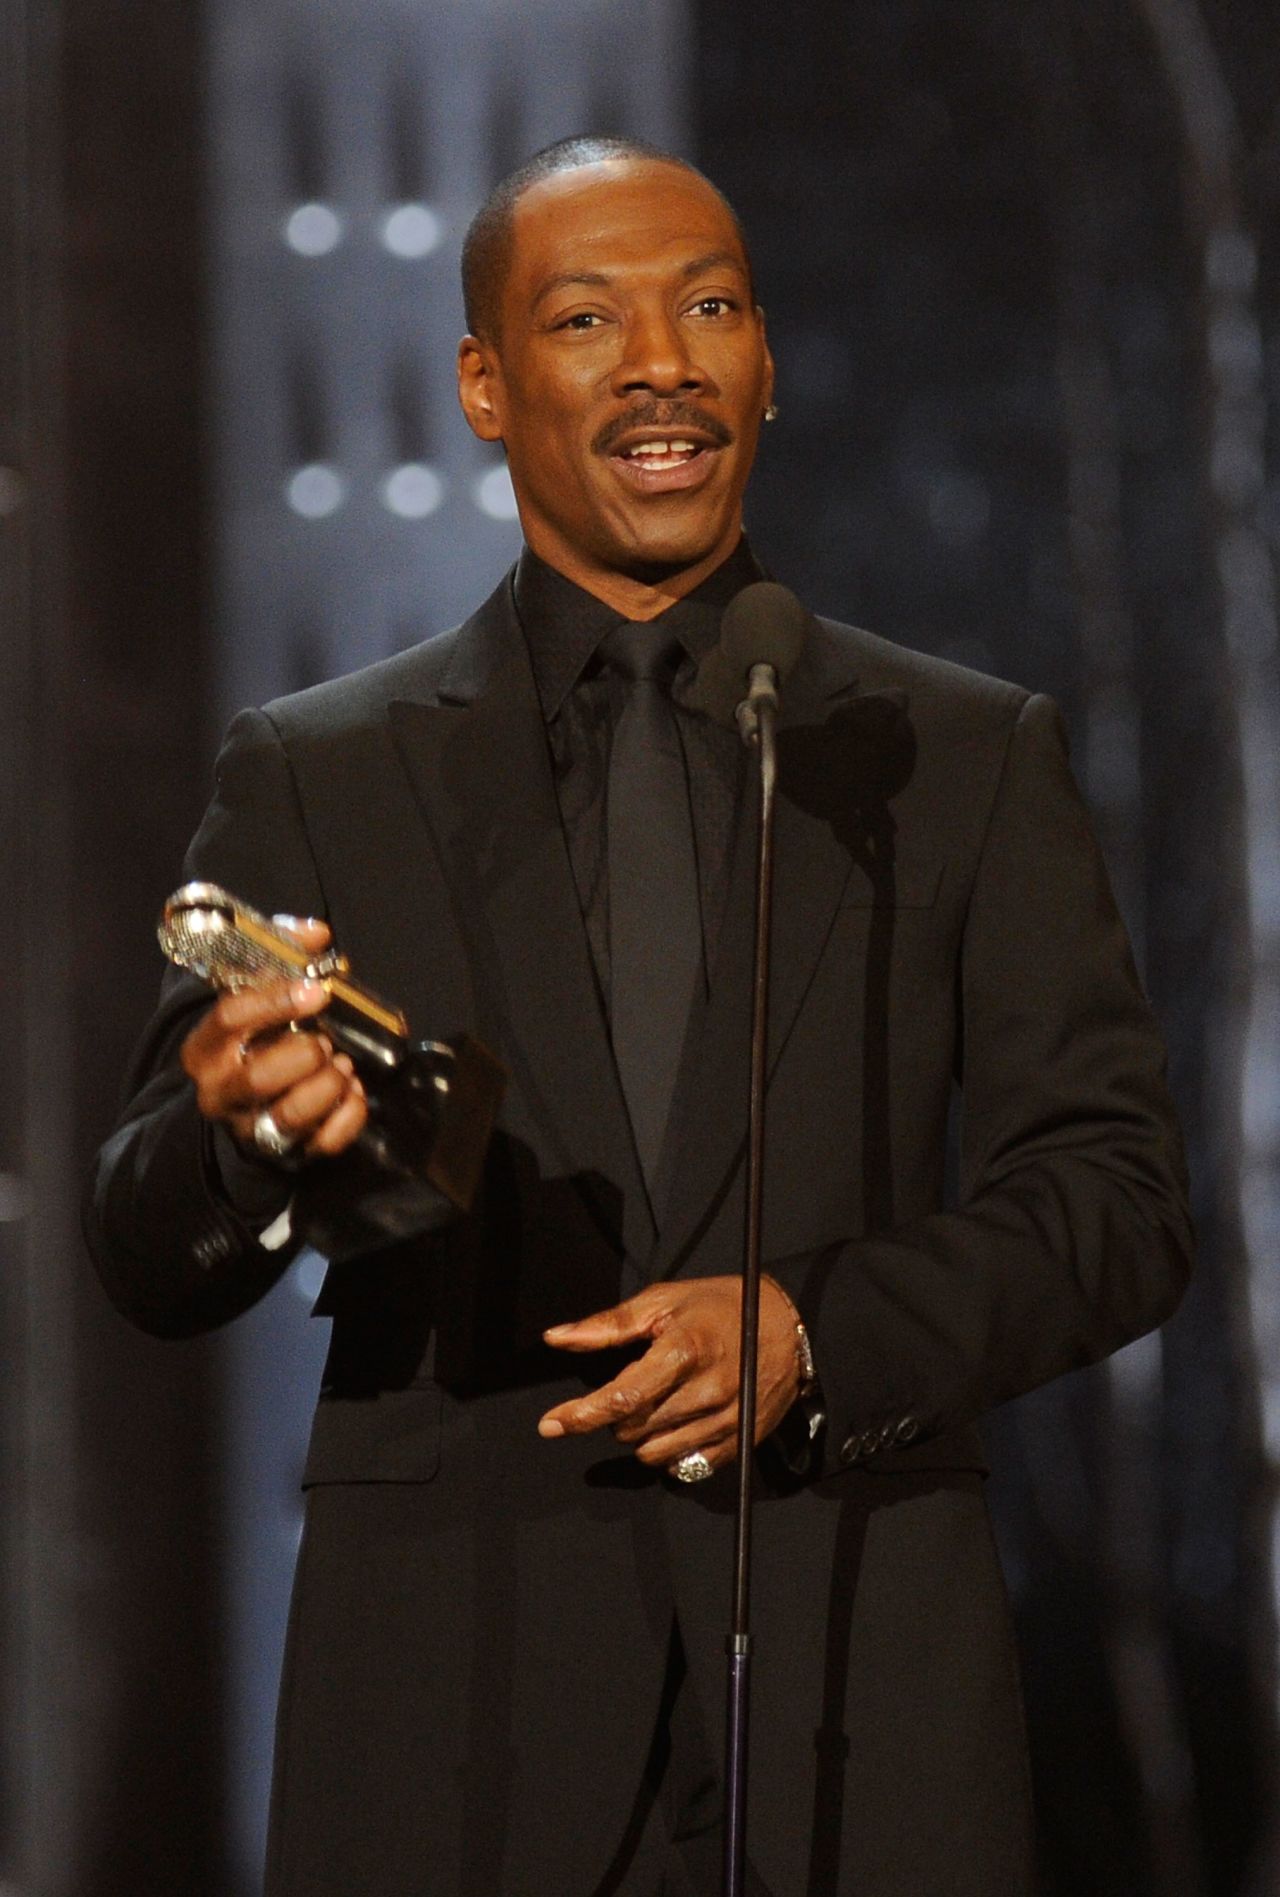 We are so bummed! Raise your hand if you were looking forward to Eddie Murphy hosting next year's 84th annual Academy Awards. So were we, but since he isn't we have a few ideas for replacements.